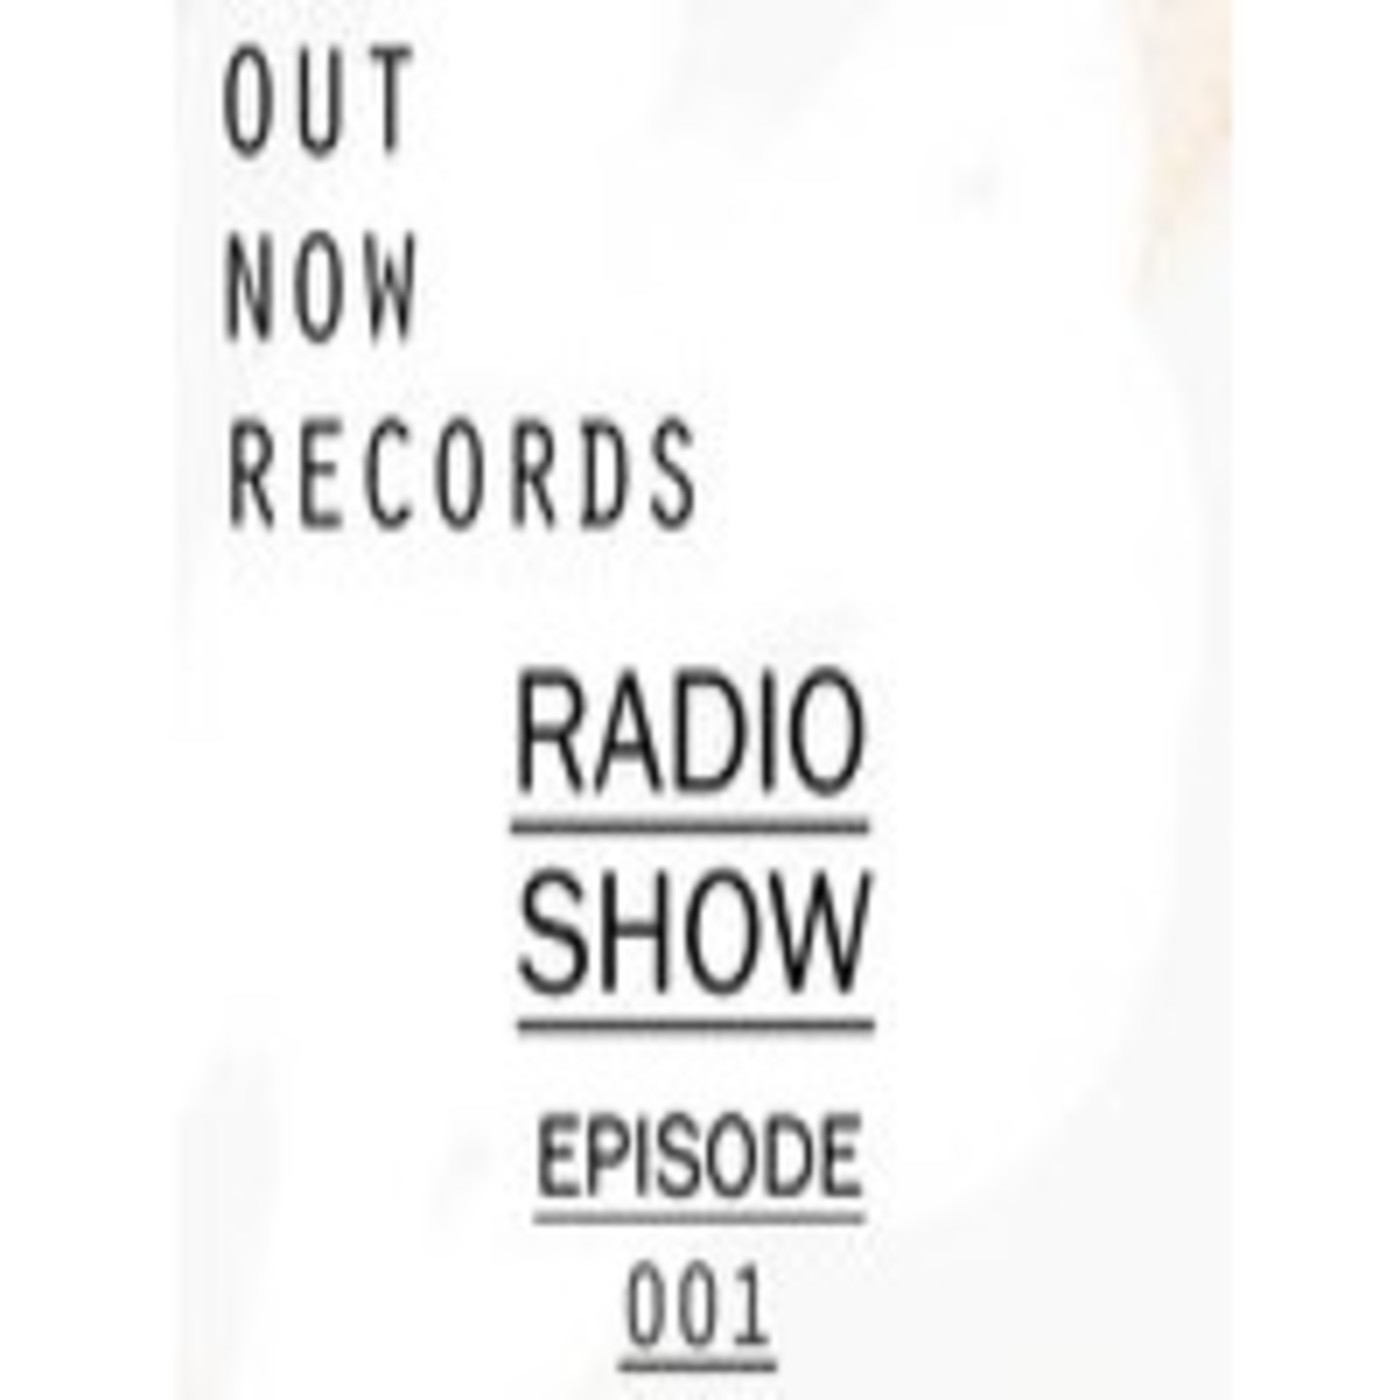 Out Now Records Radio Show #001